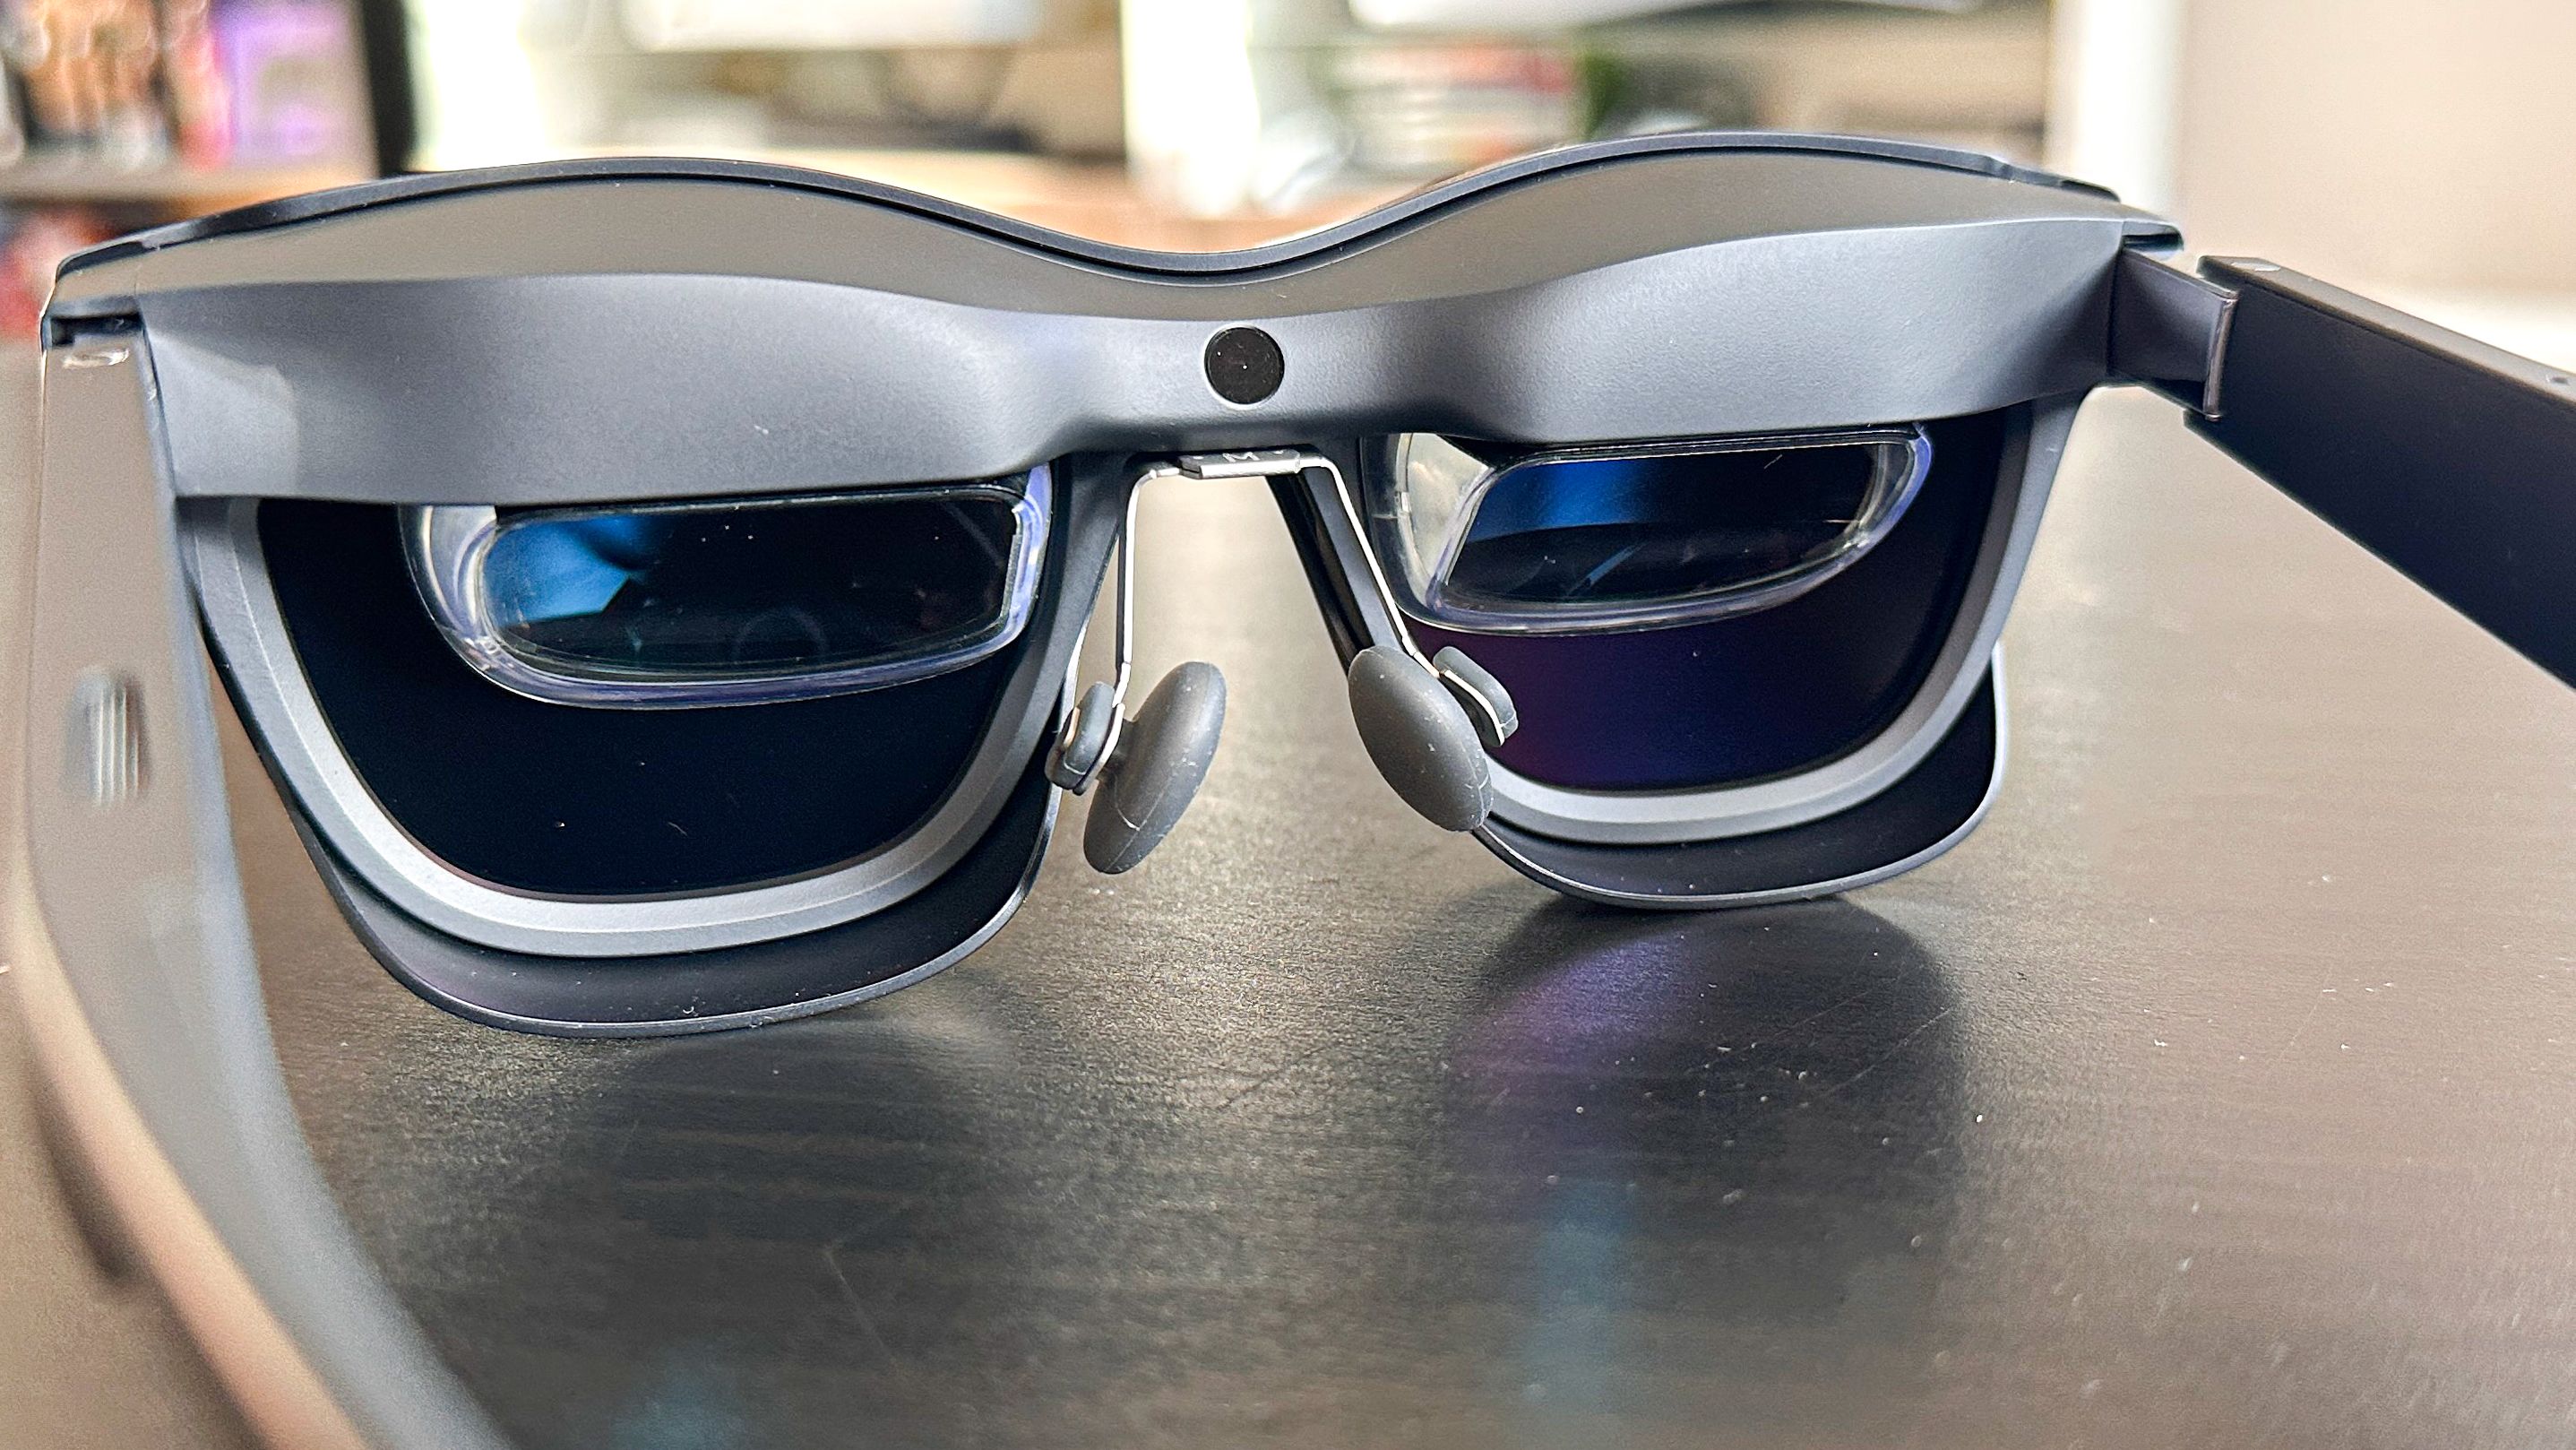 Xreal Air 2 Review: Greatly Improved, Well-Rounded AR Glasses